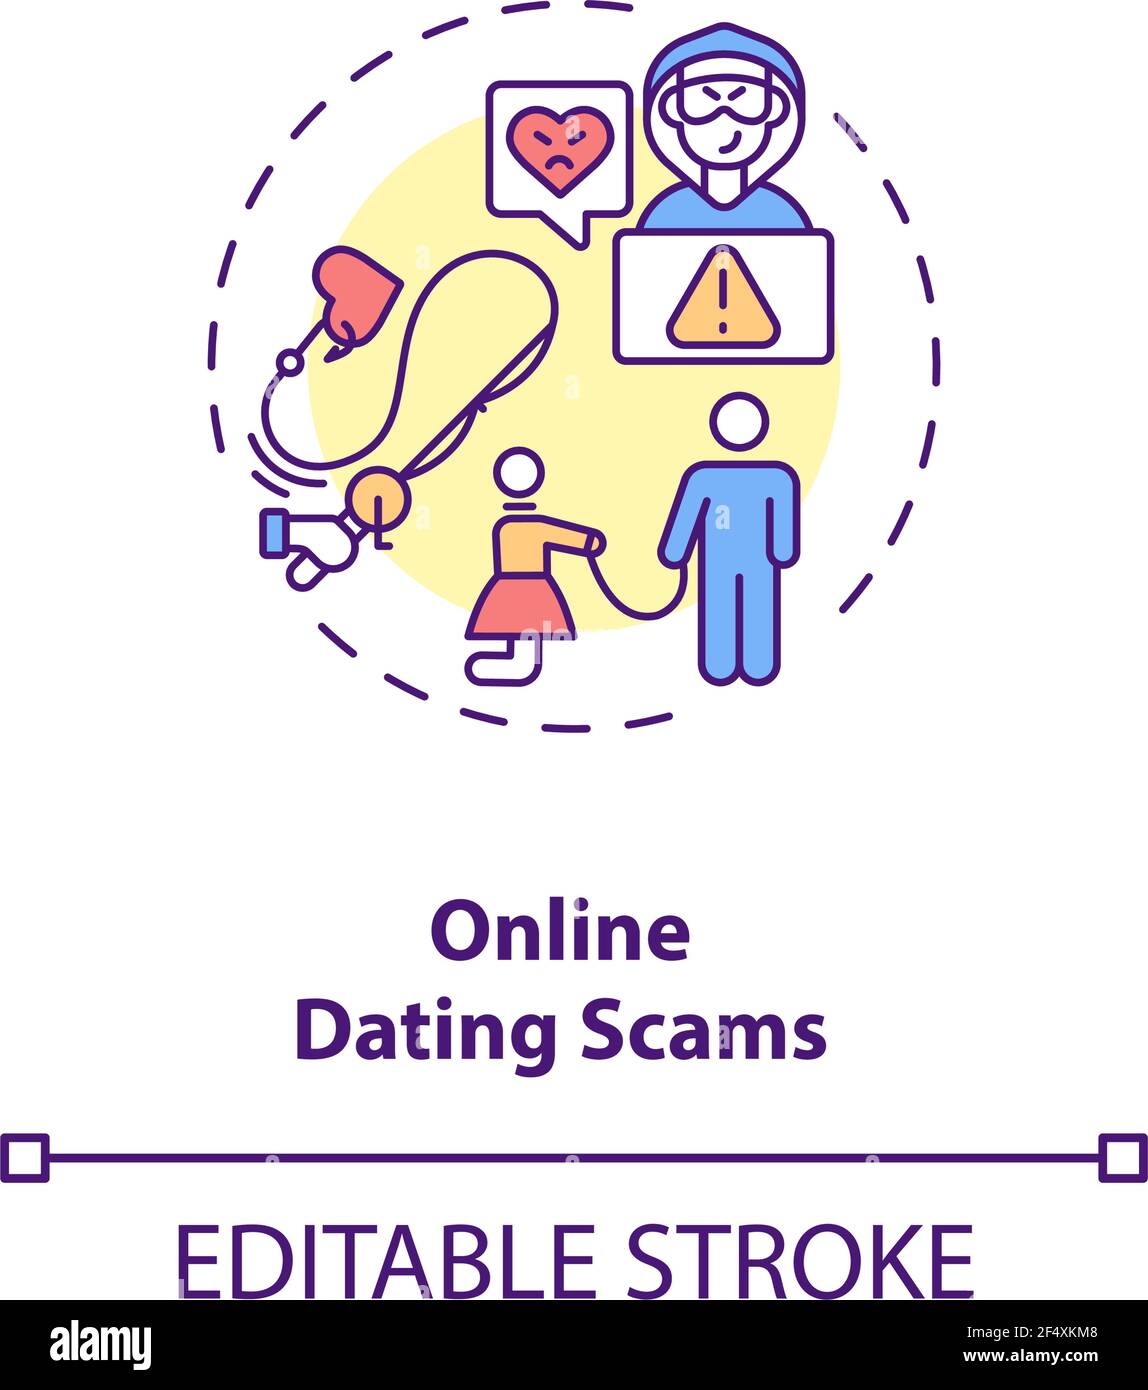 Online dating scams concept icon. Stock Vector